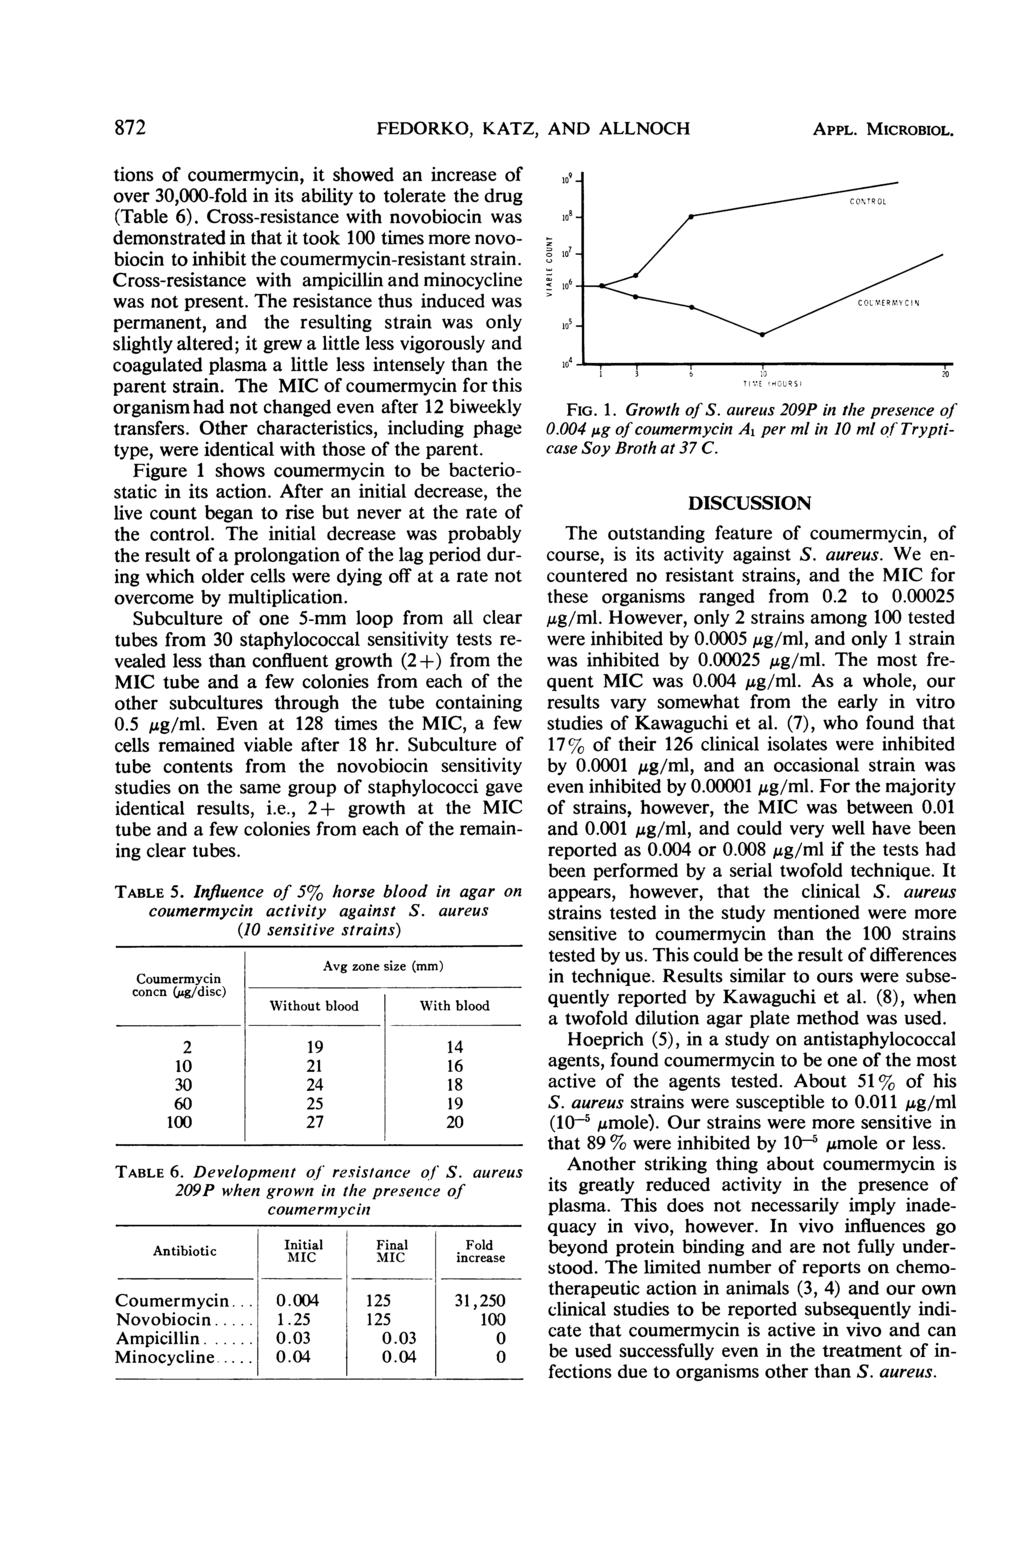 72 FEDORKO, KATZ, AND ALLNOCH APPL. MICROBIOL. tions of coumermycin, it showed an increase of over 0,000-fold in its ability to tolerate the drug (Table 6).